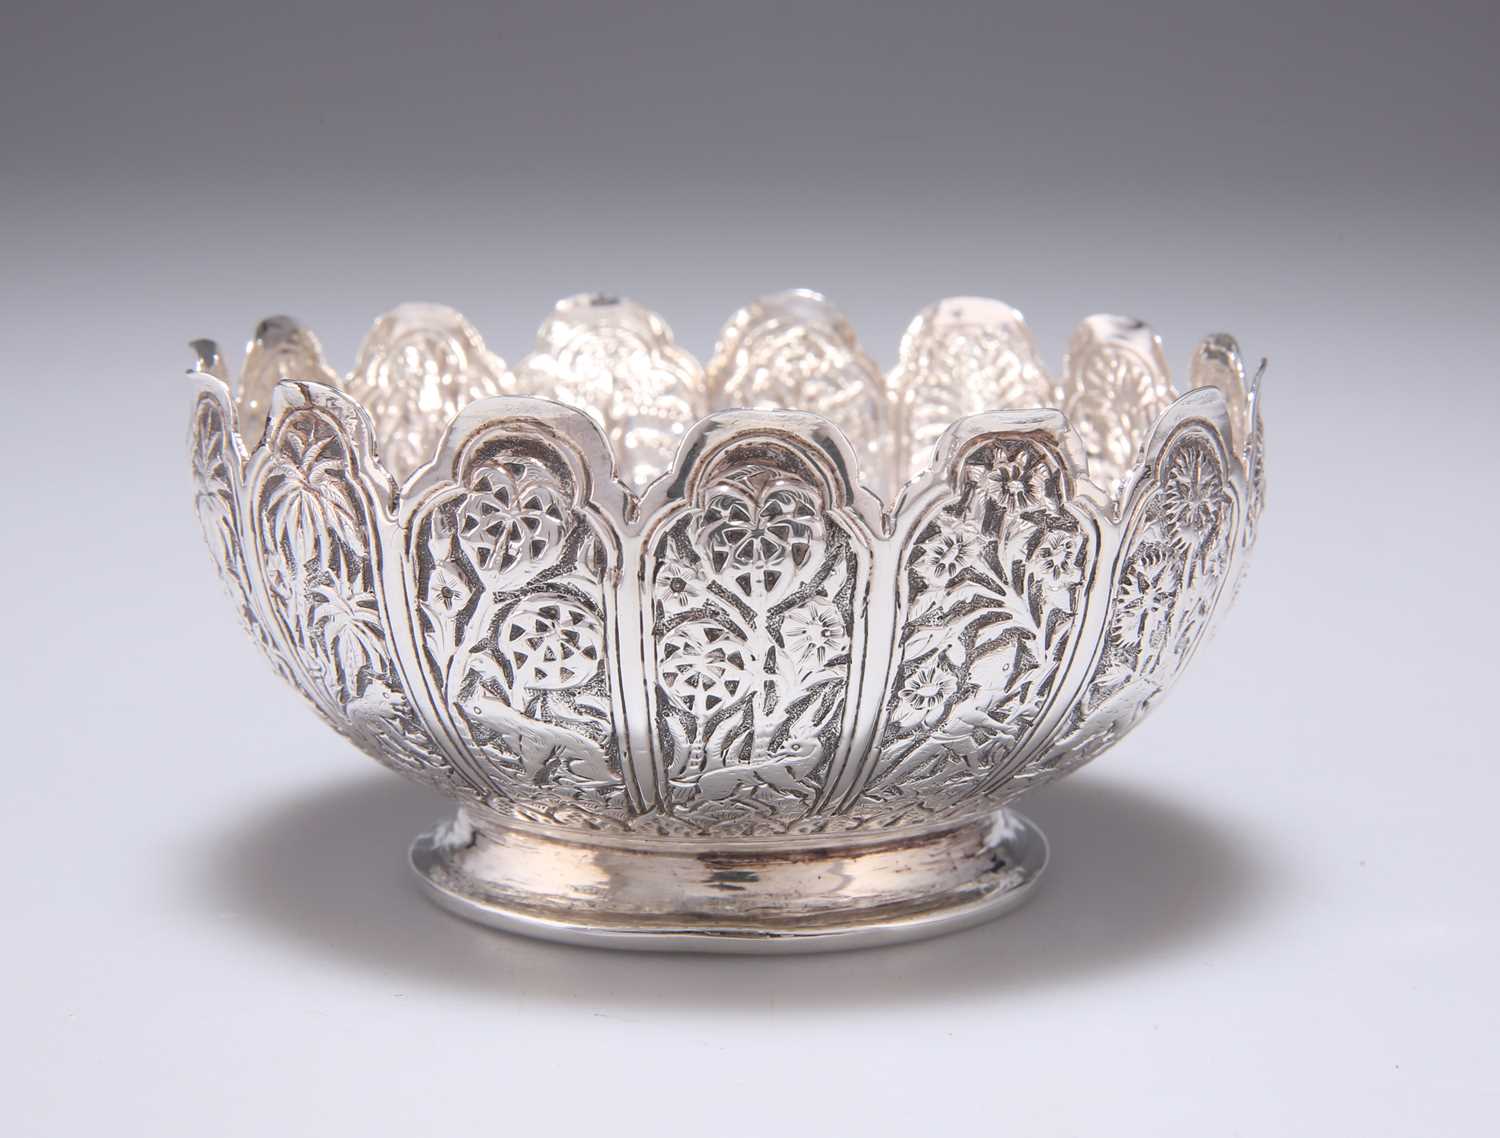 A LUCKNOW INDIAN SILVER 'JUNGLE BOOK' BOWL, LATE 19TH CENTURY - Image 2 of 3